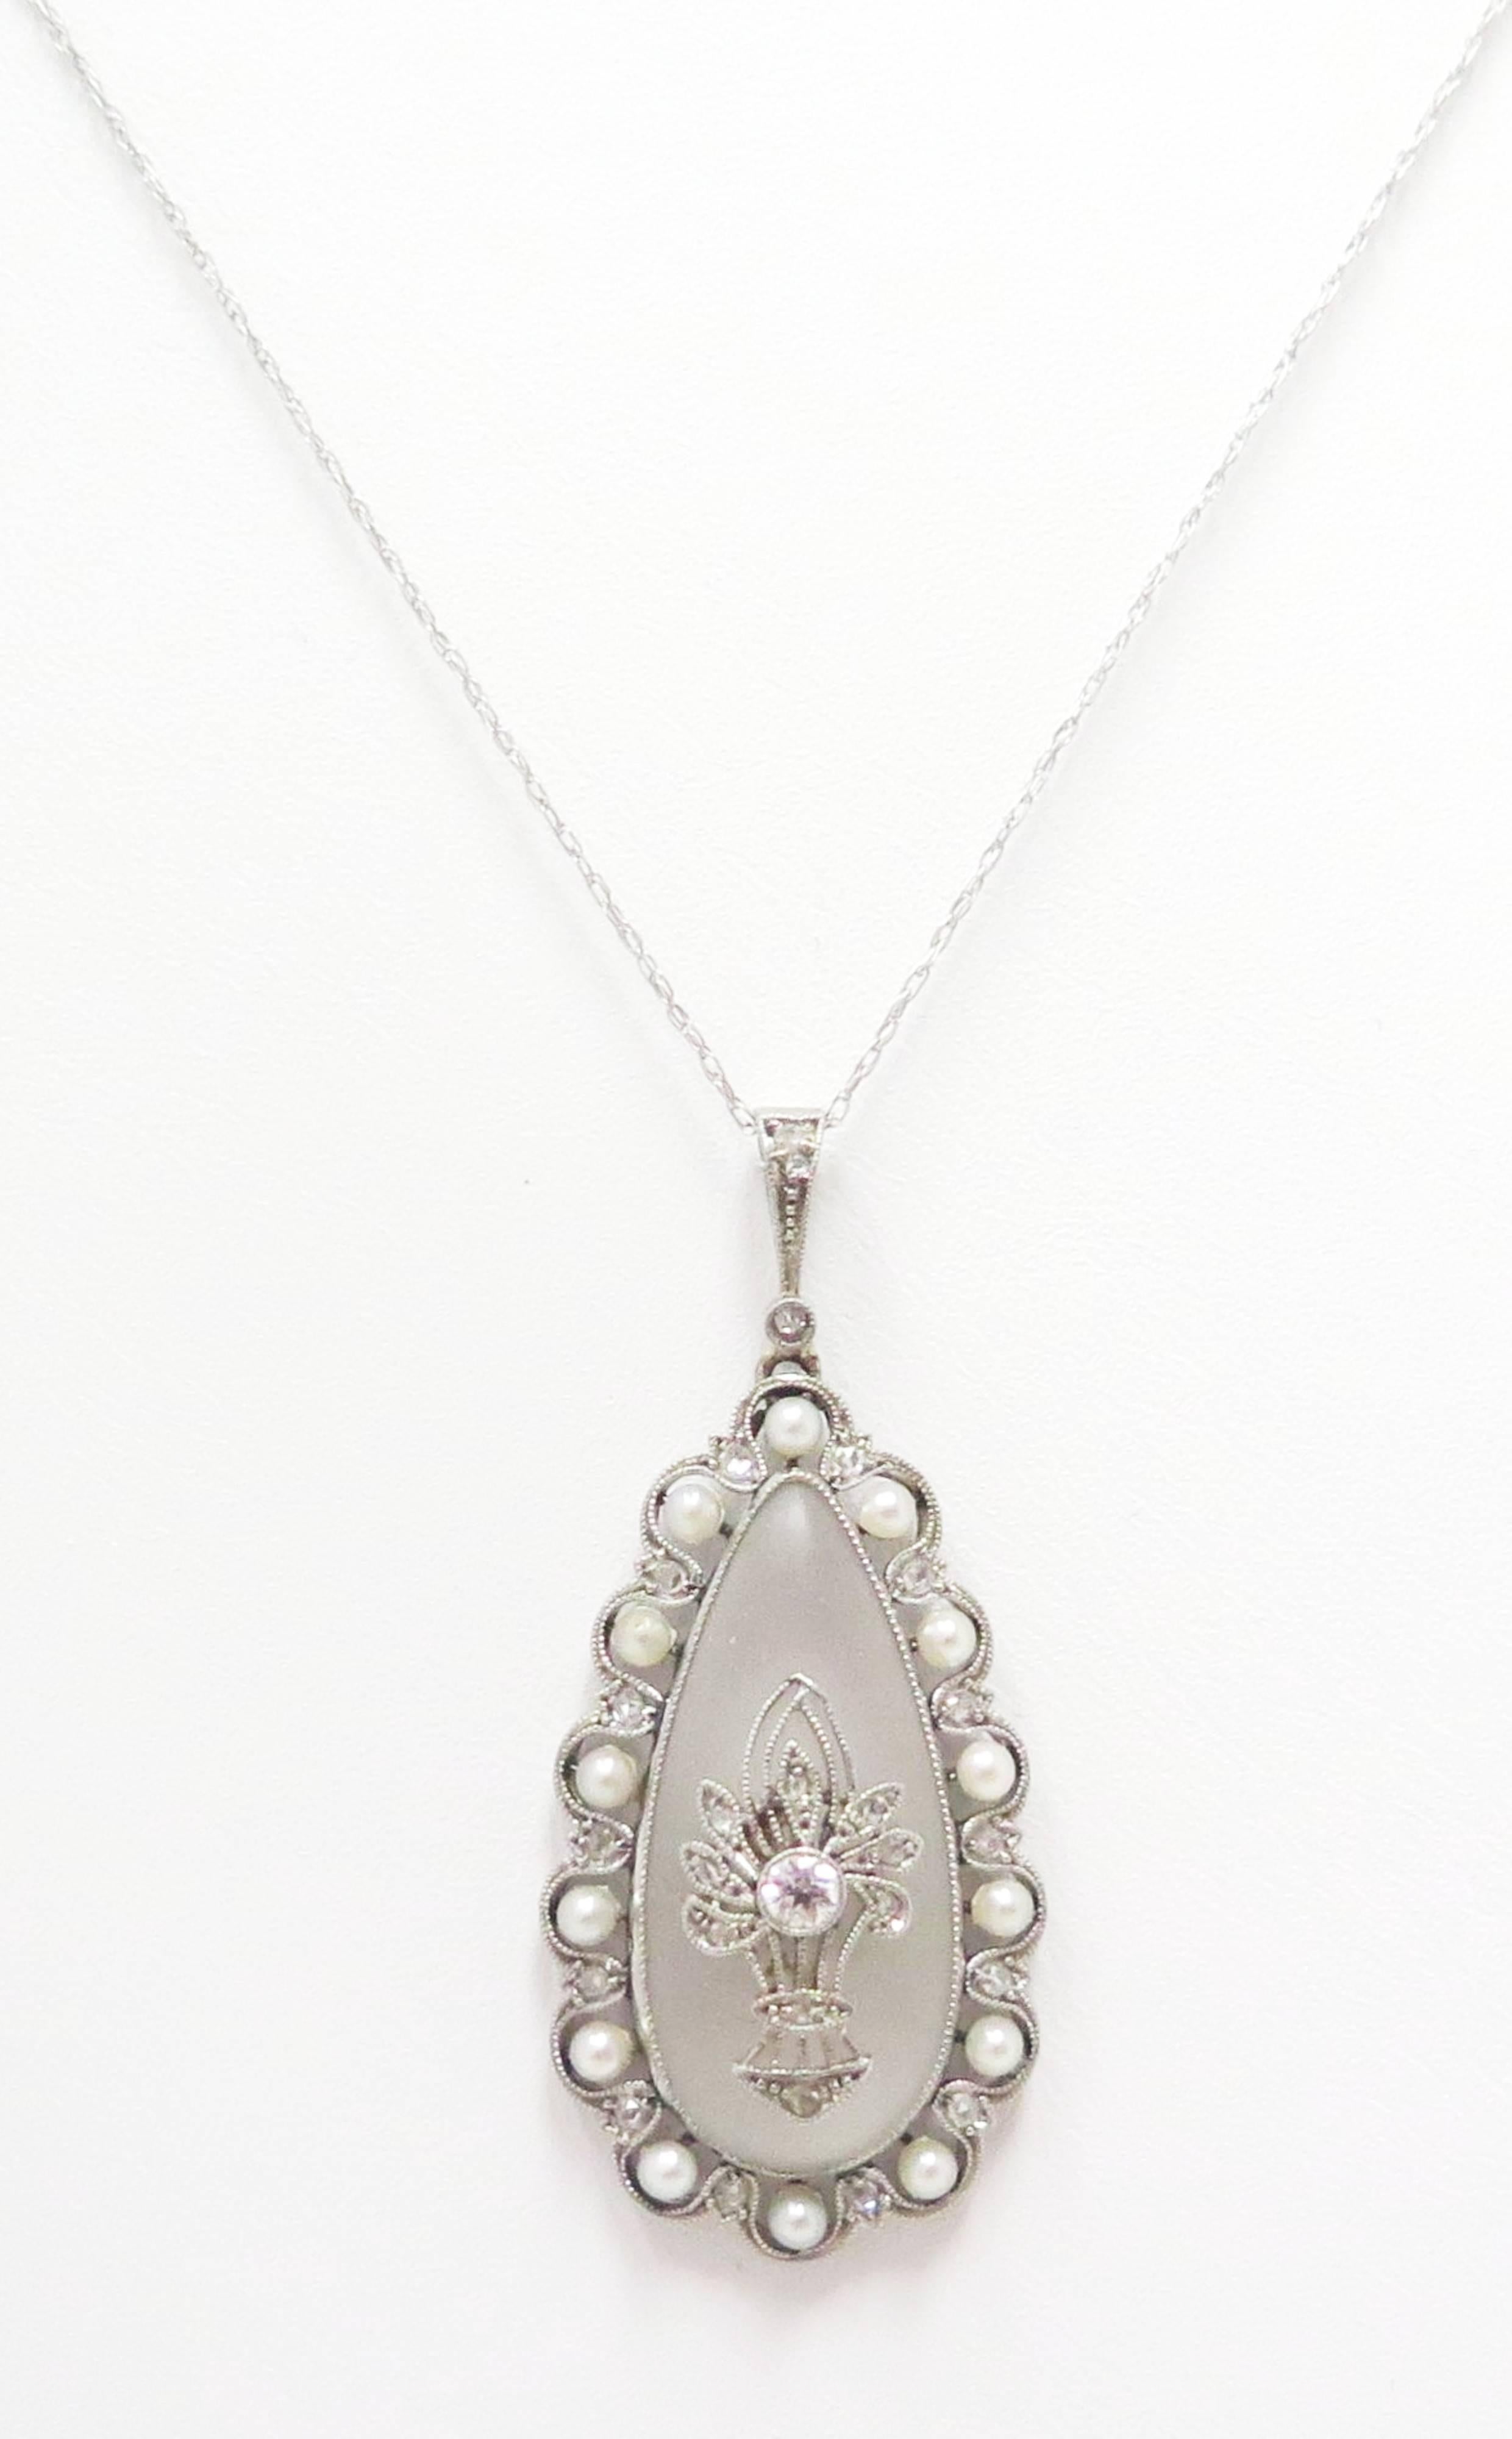 Round Cut Art Deco 1930s Rock Crystal, Diamond and Cultured Pearls on Chain / Platinum